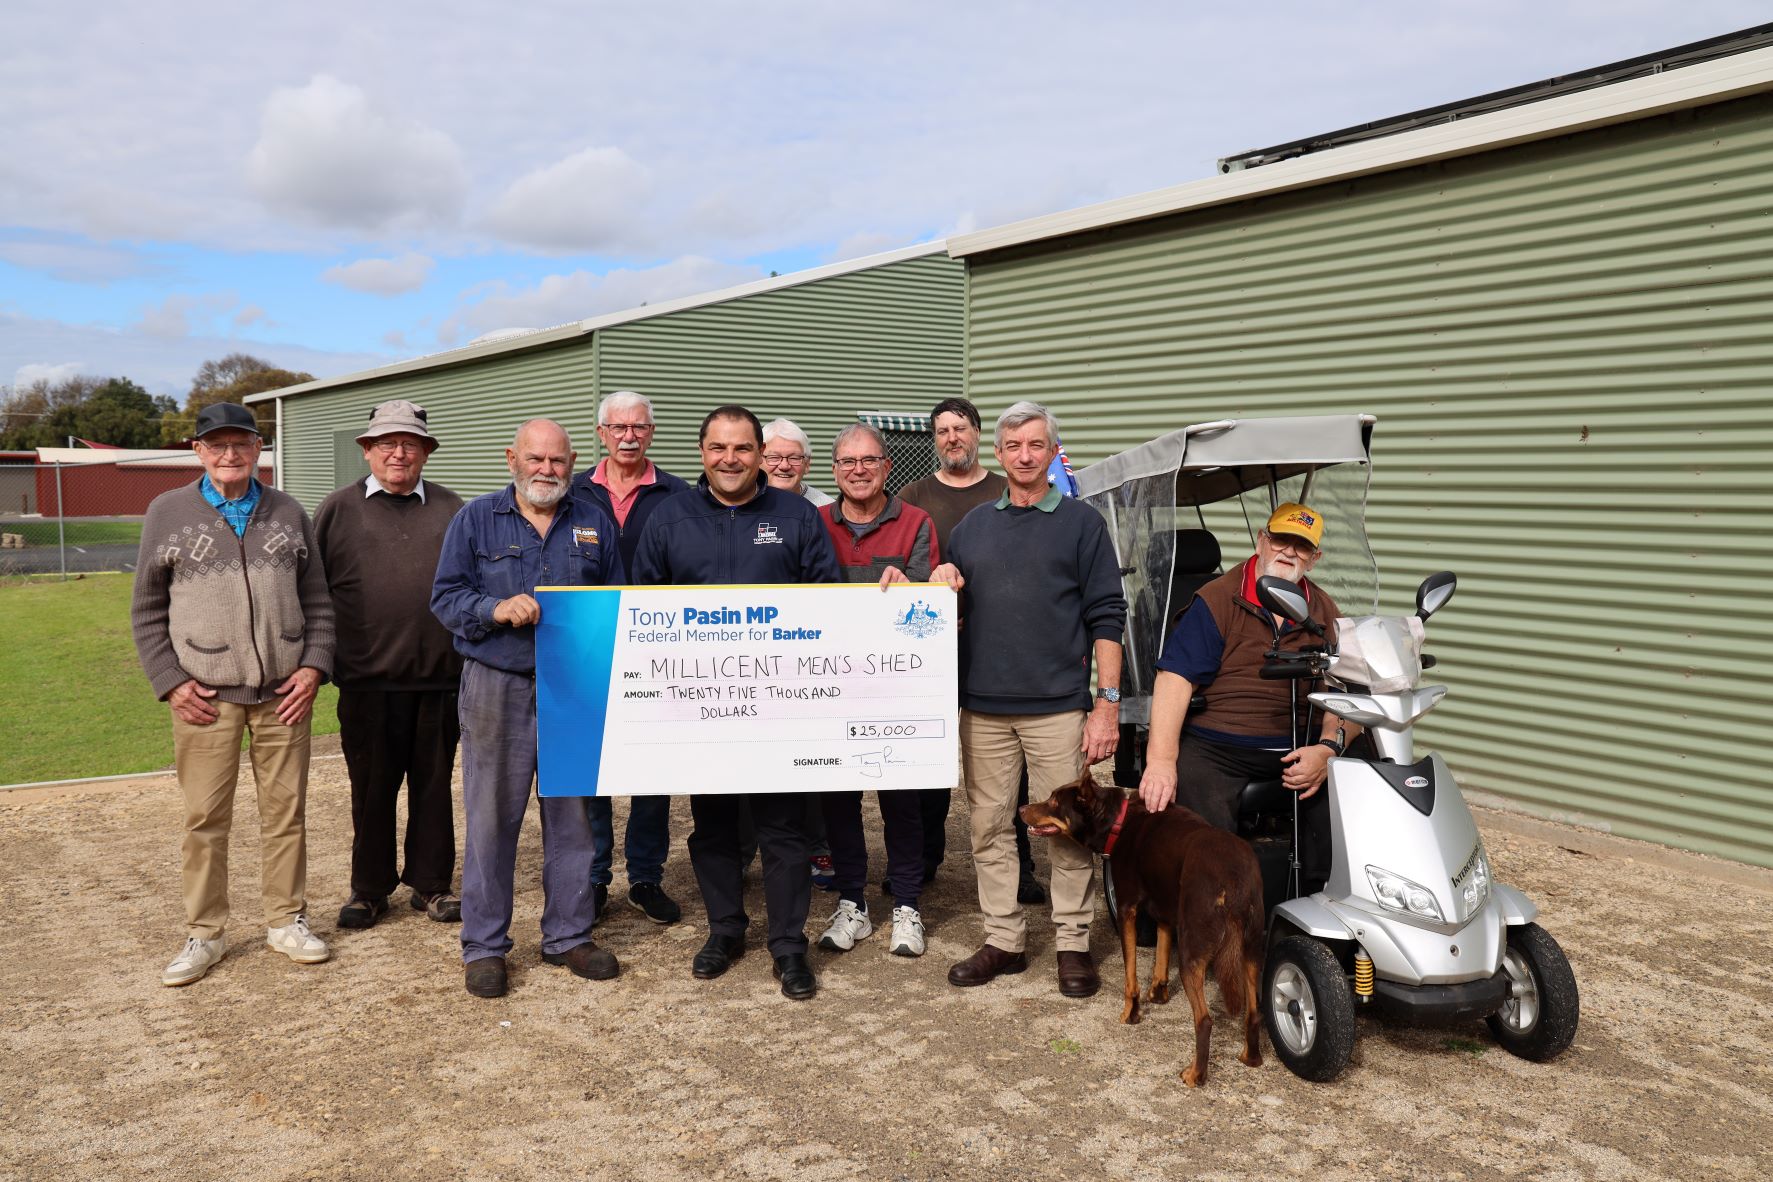 PASIN SUPPORTS MILLICENT MENS SHED